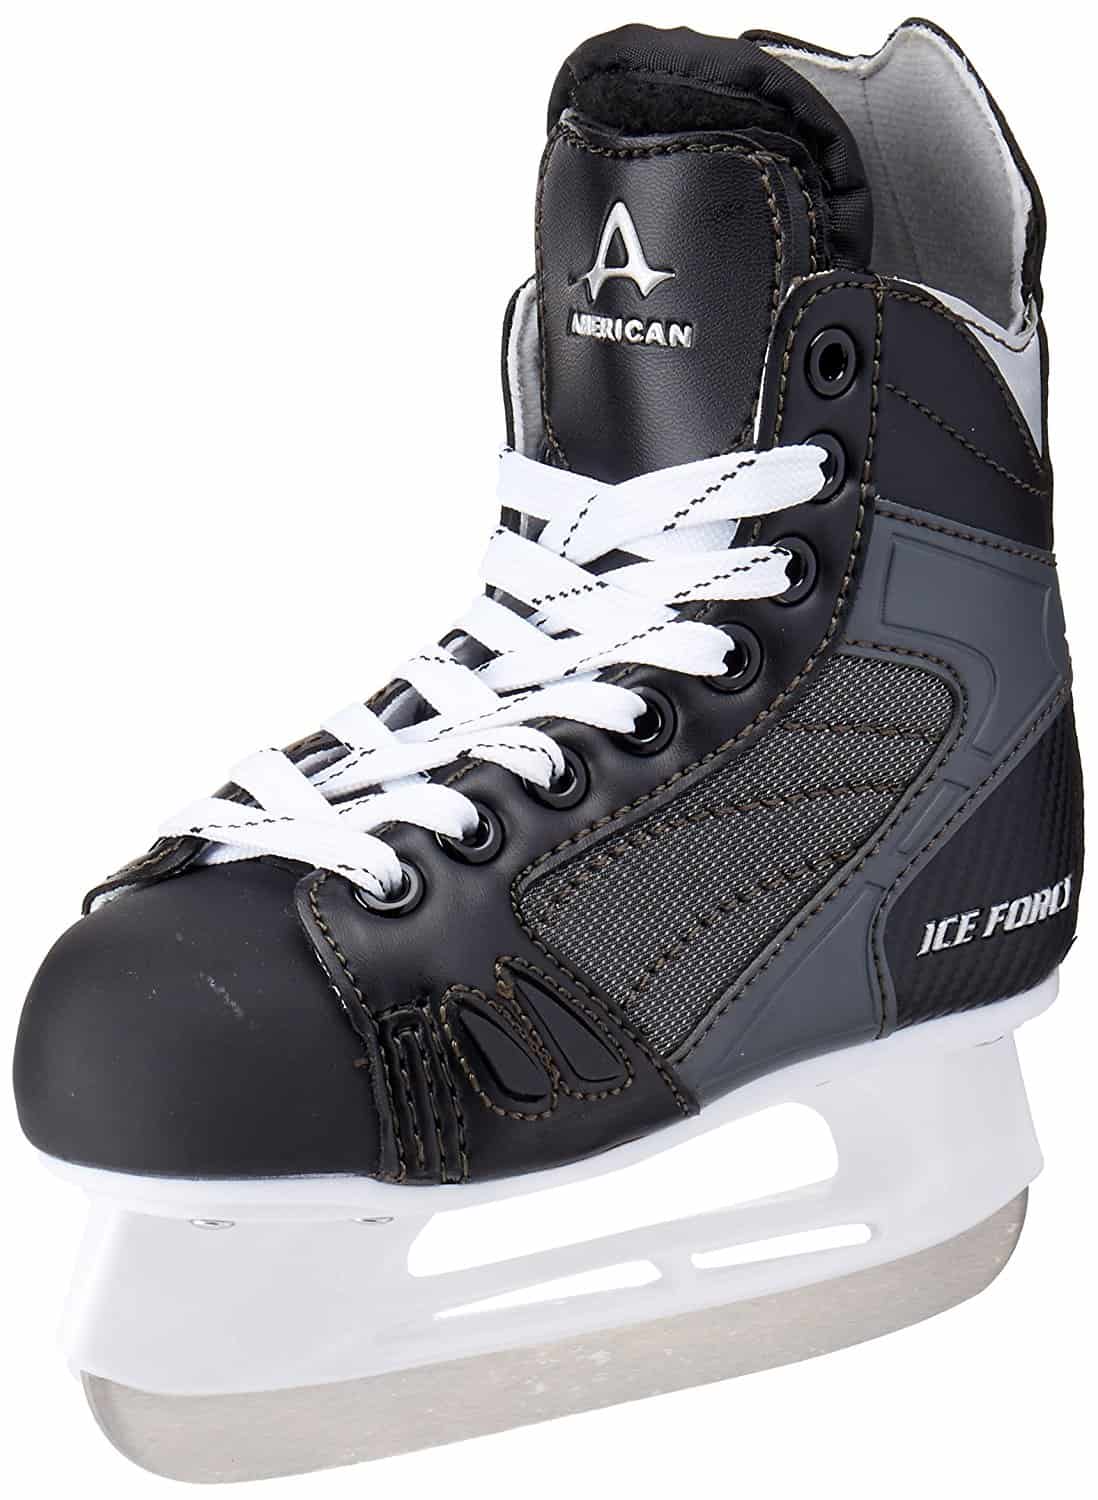 American Athletic Shoe Boy's Ice Force.